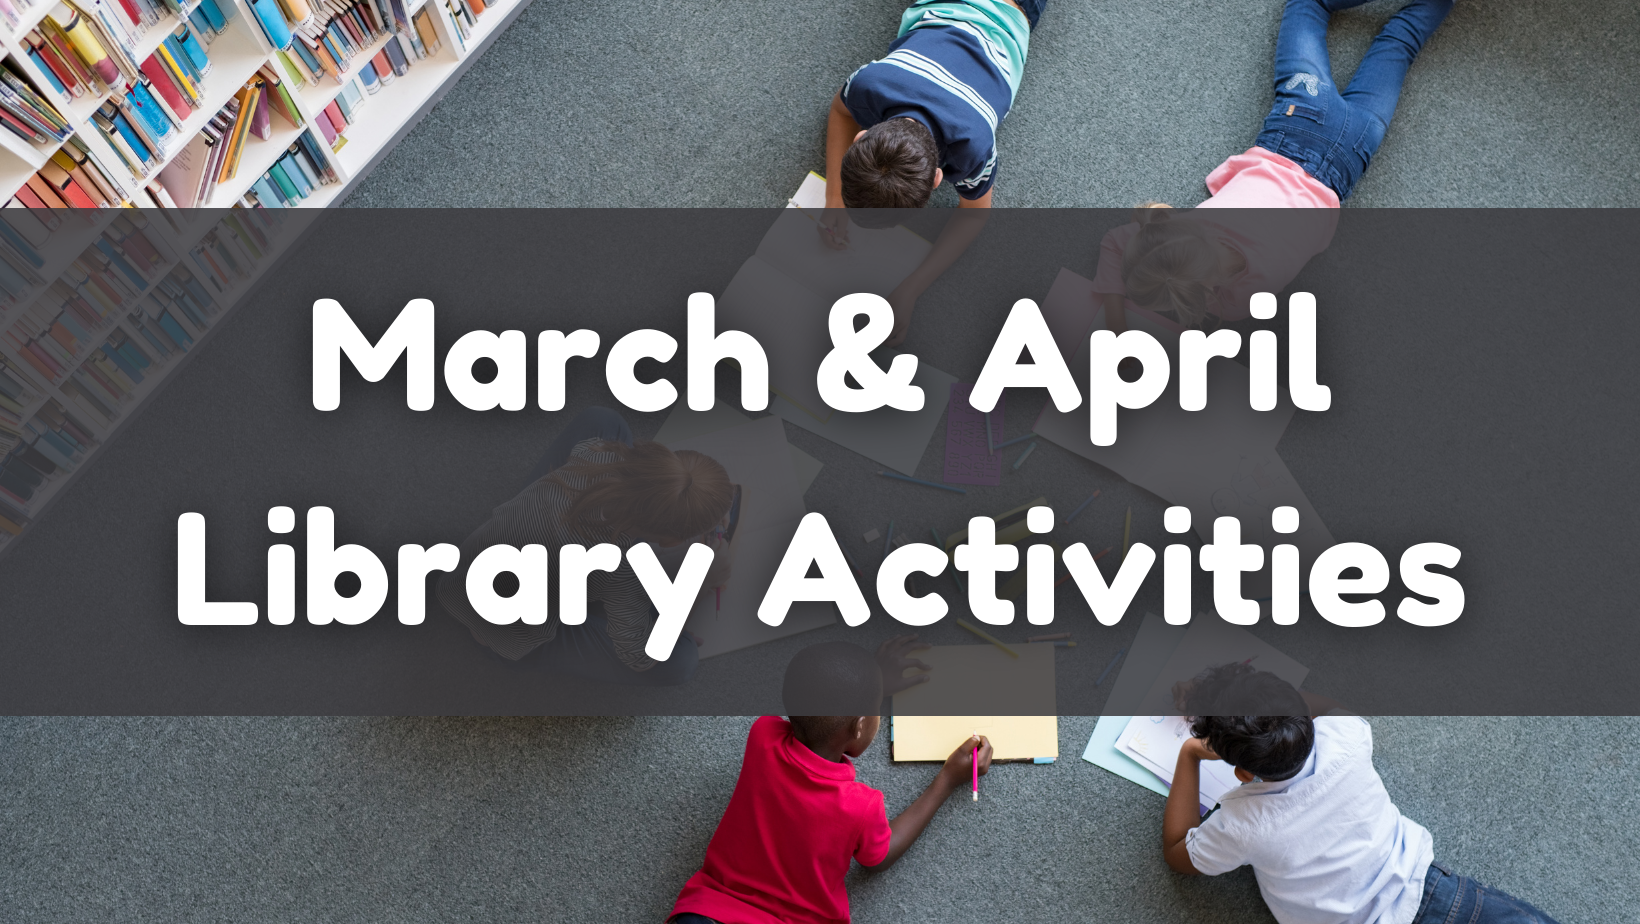 March & April Library Activities